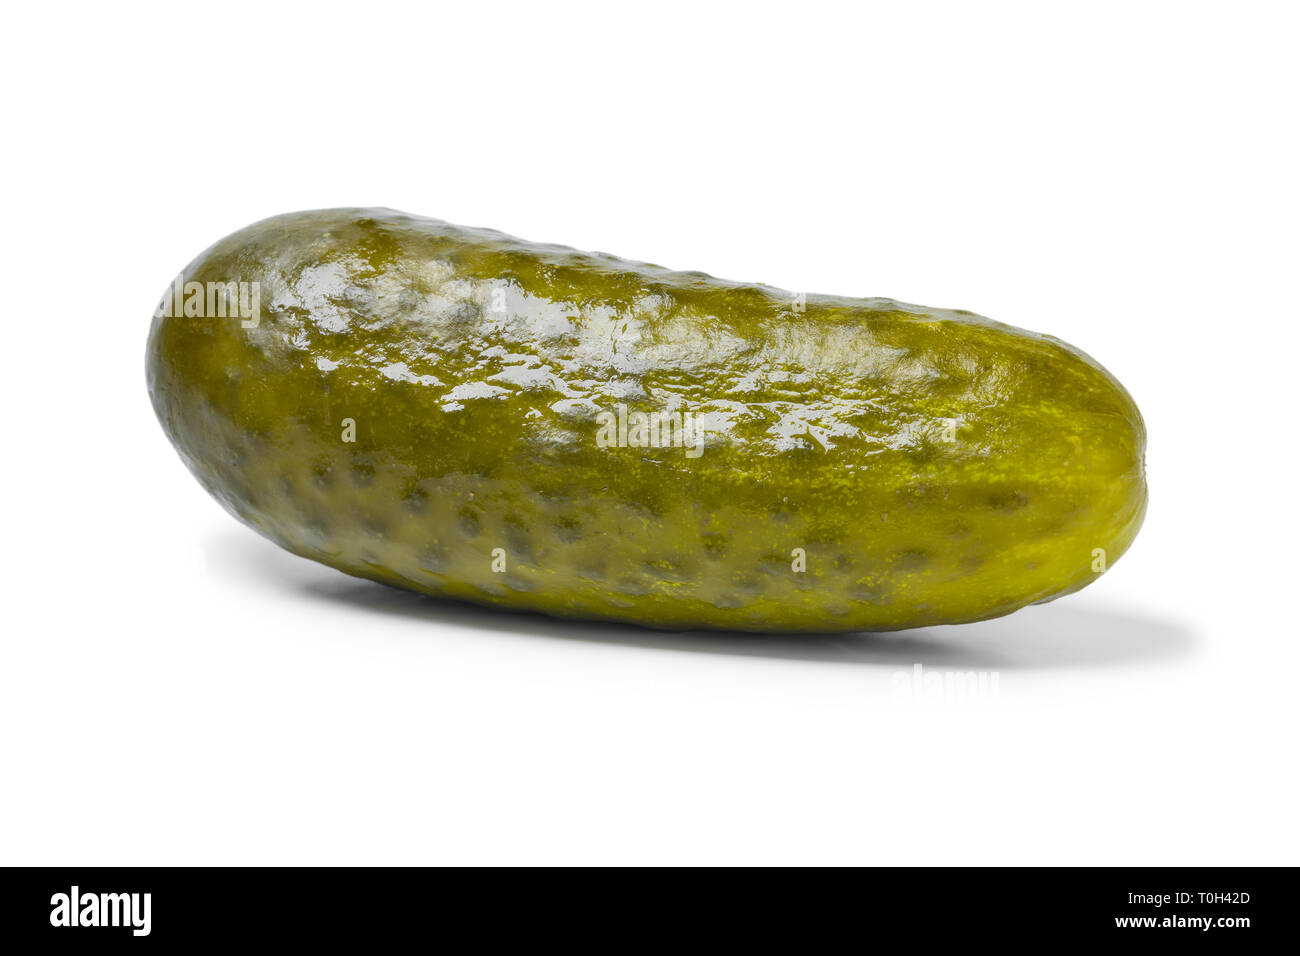 Whole single pickled gherkin isolated on white background Stock Photo